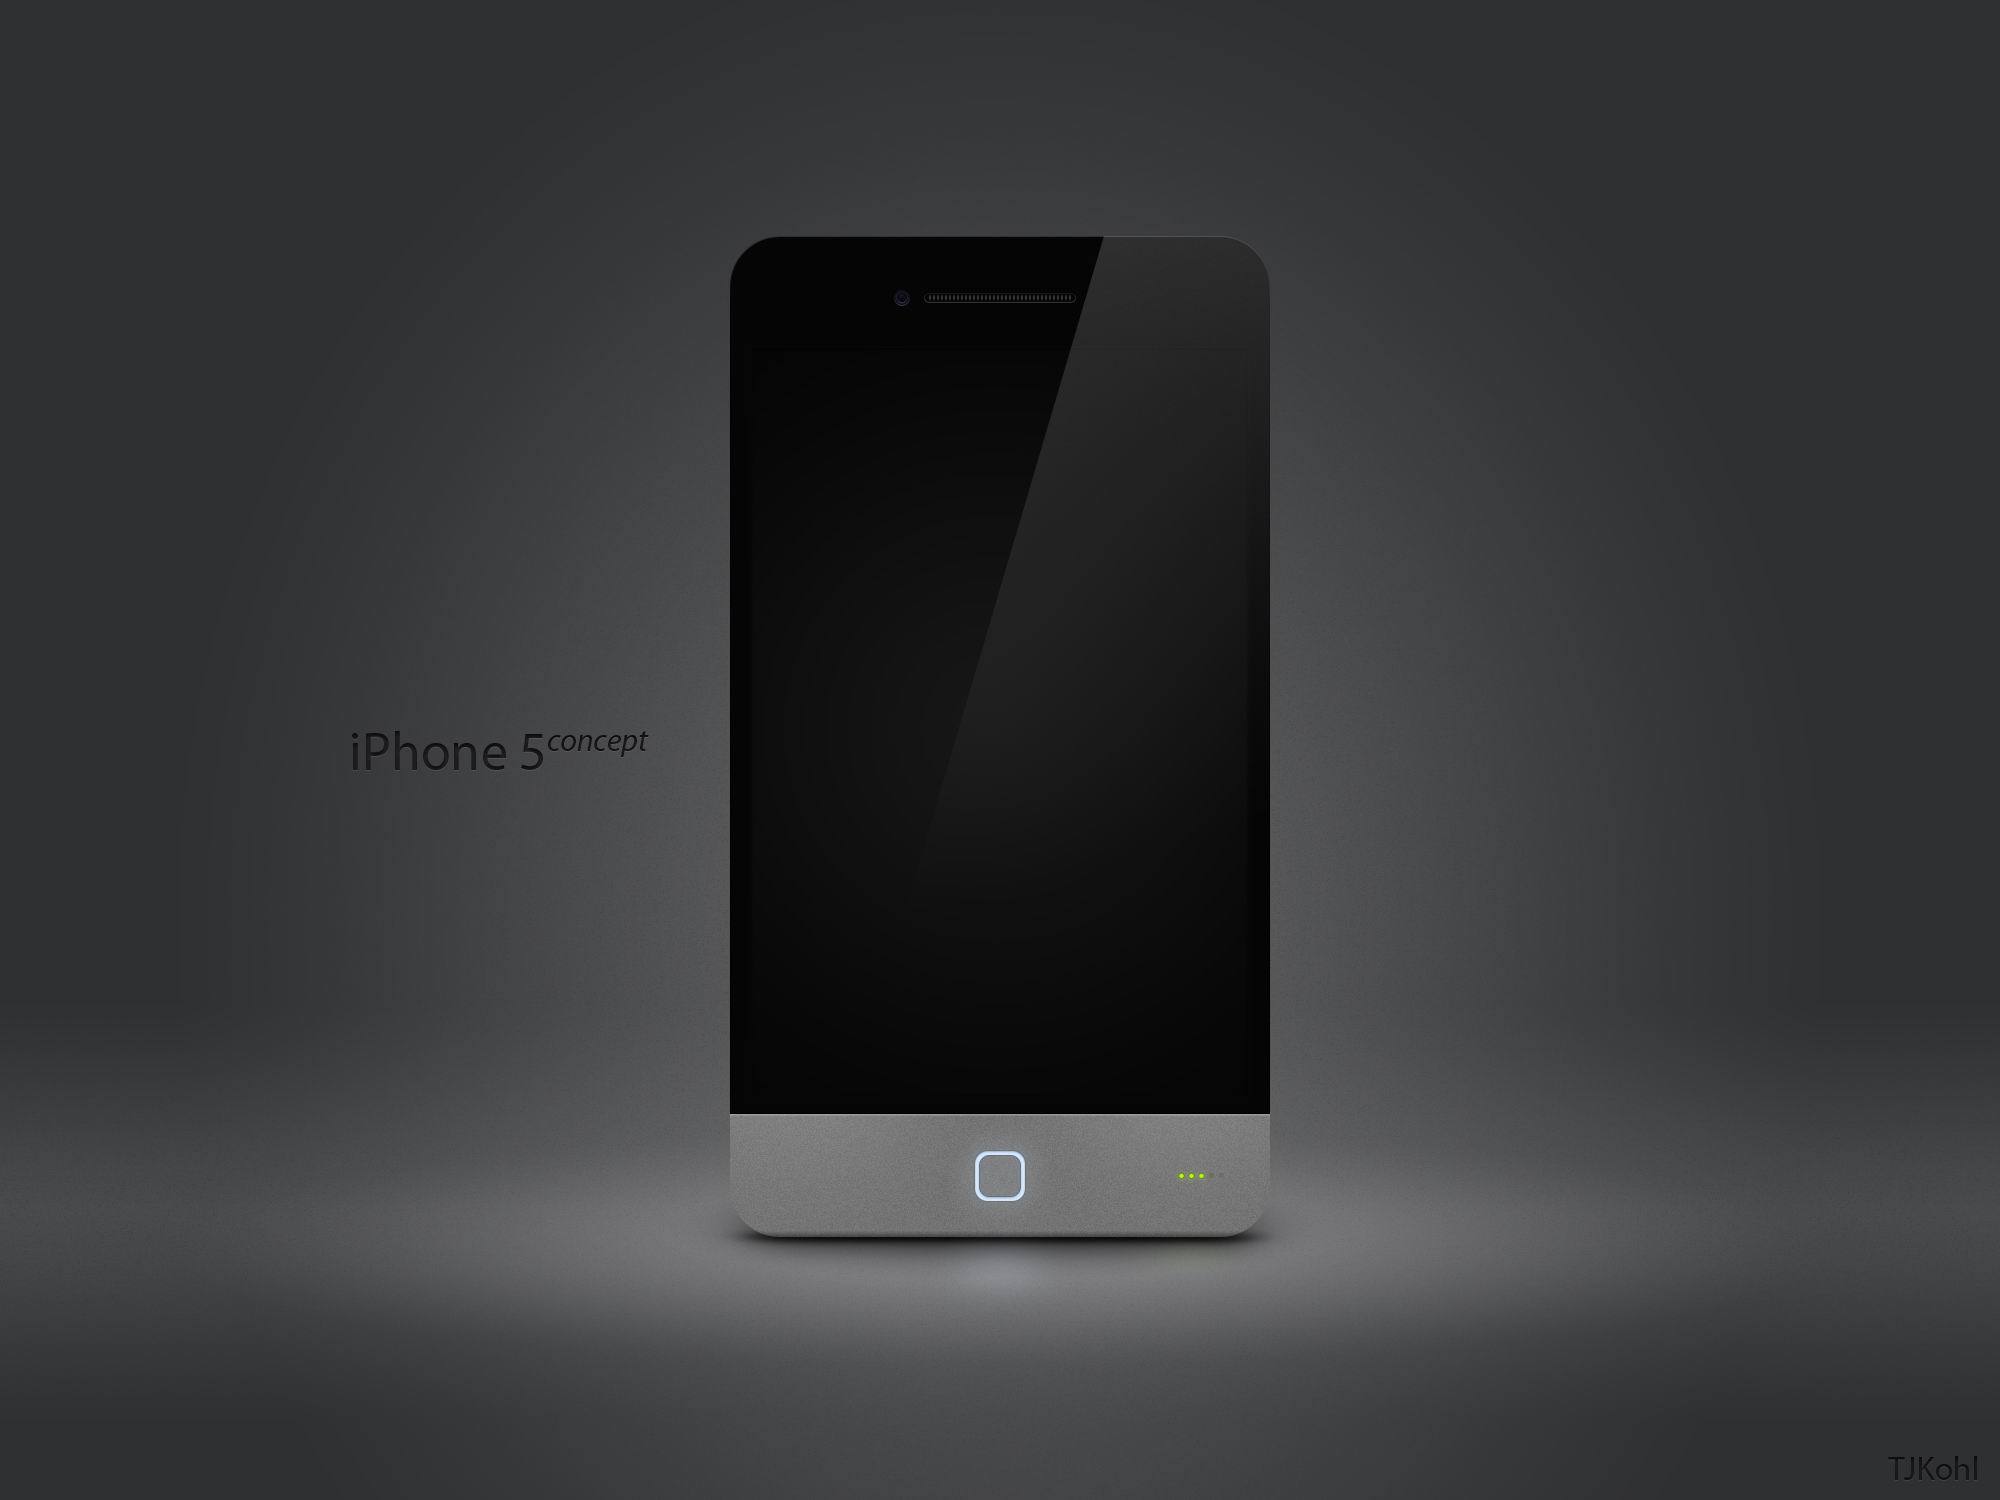 Free download Iphone 5s concept wallpapers and images wallpapers